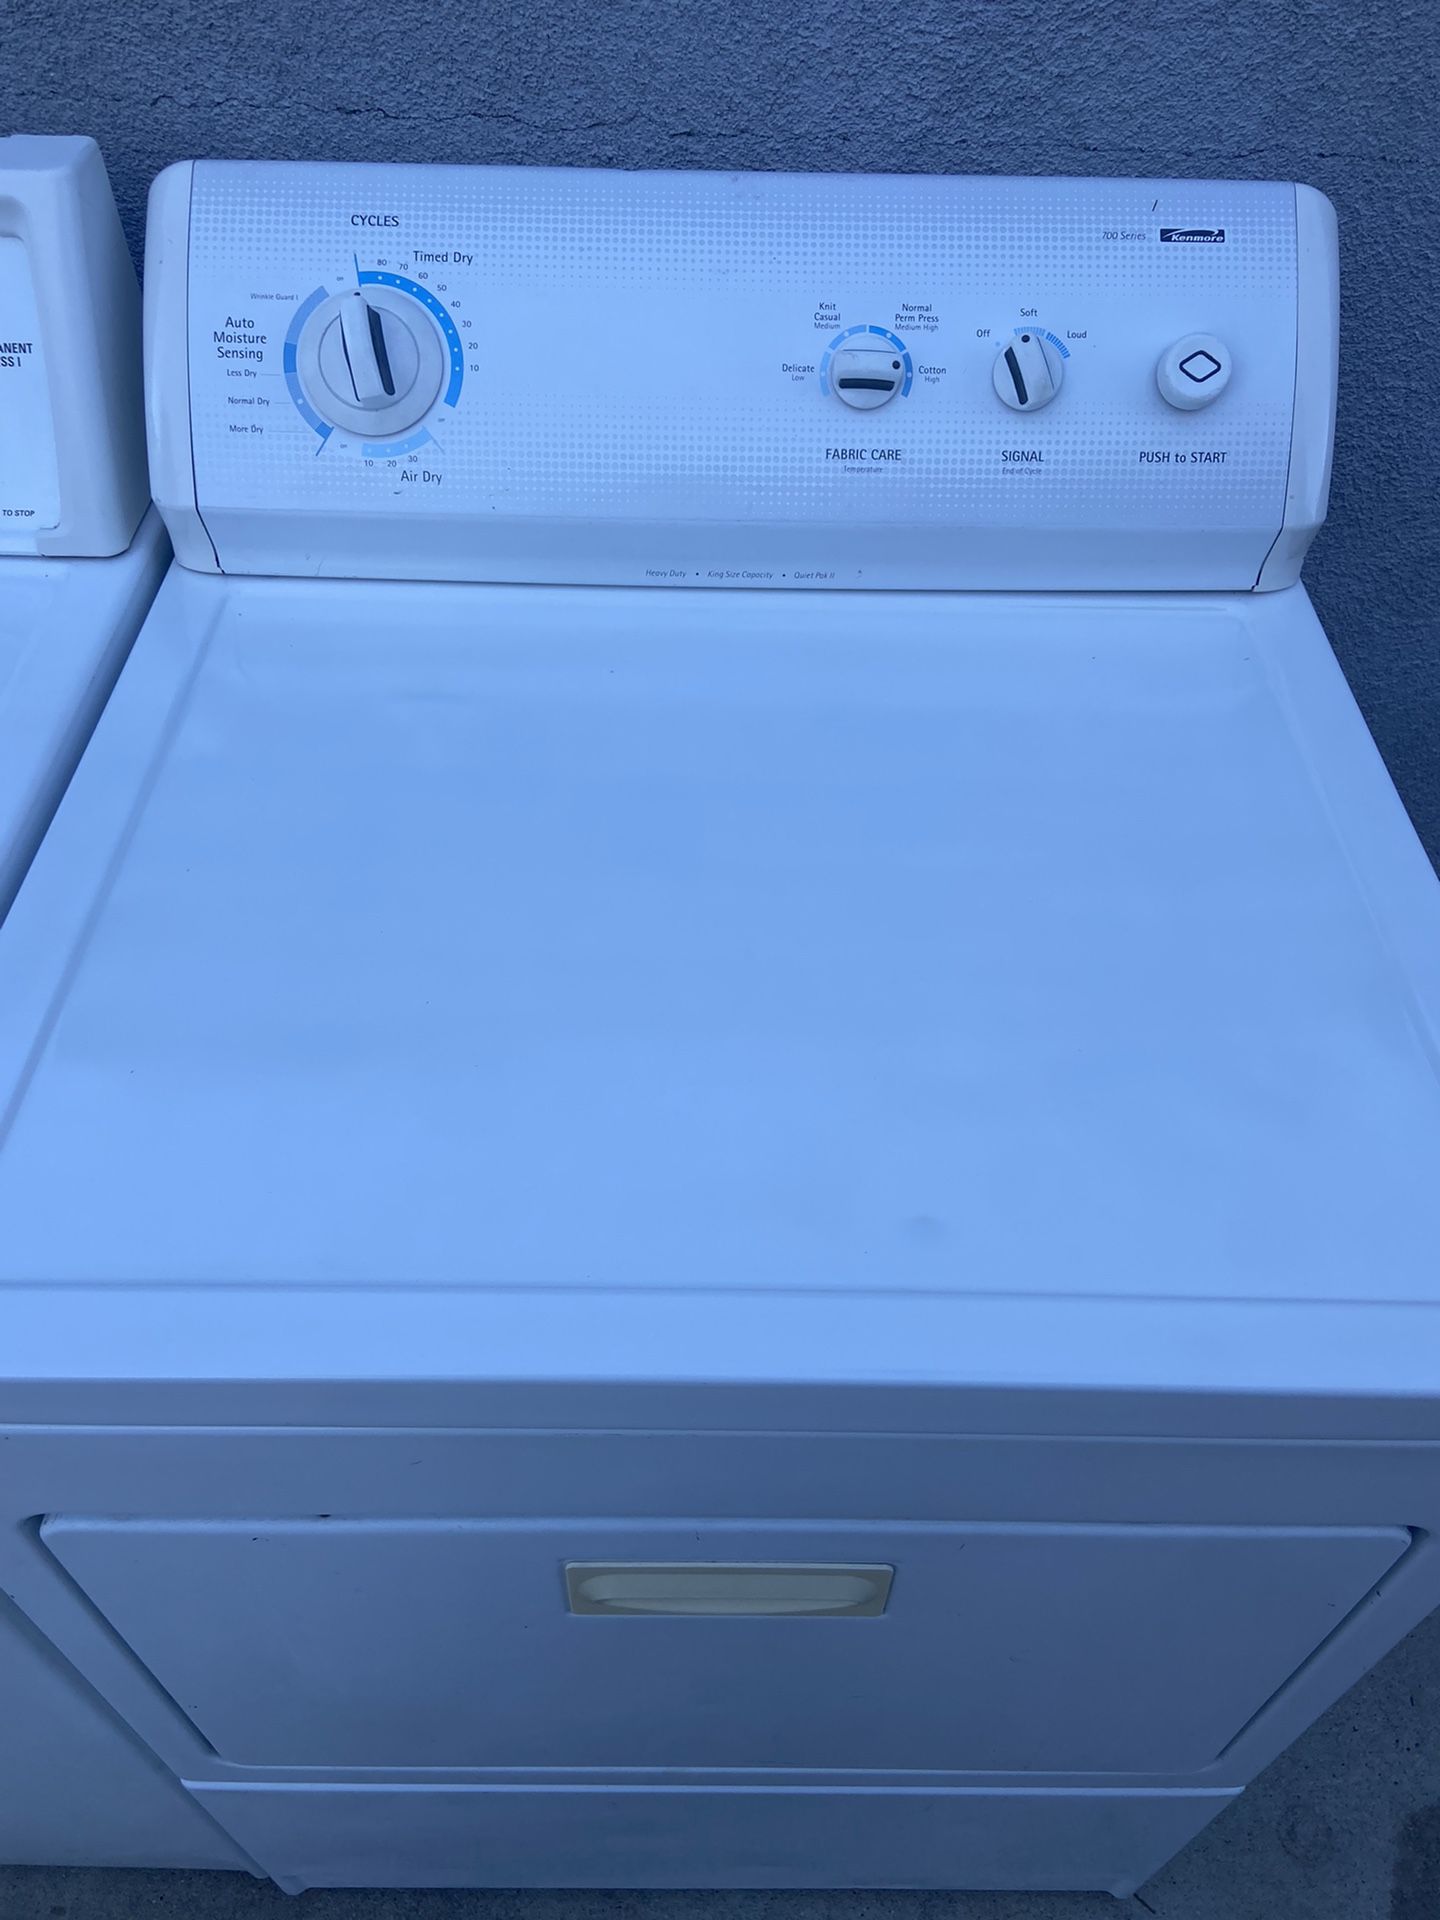 KENMORE GAS DRYER  $175 DELIVERED AND INSTALLED  90 DAY WARRANTY 